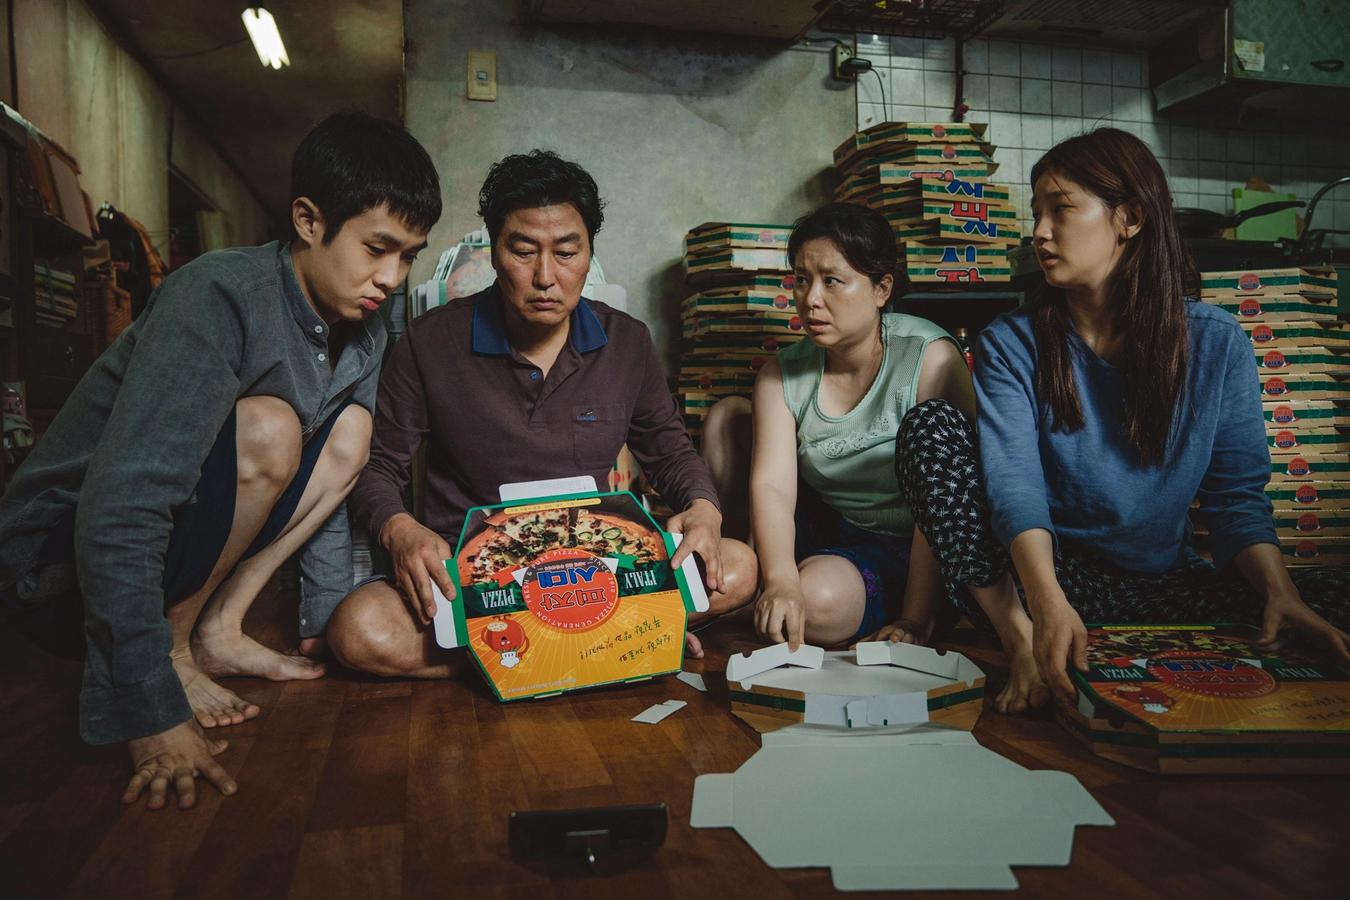 The family in Parasite is gathered around pizza boxes.